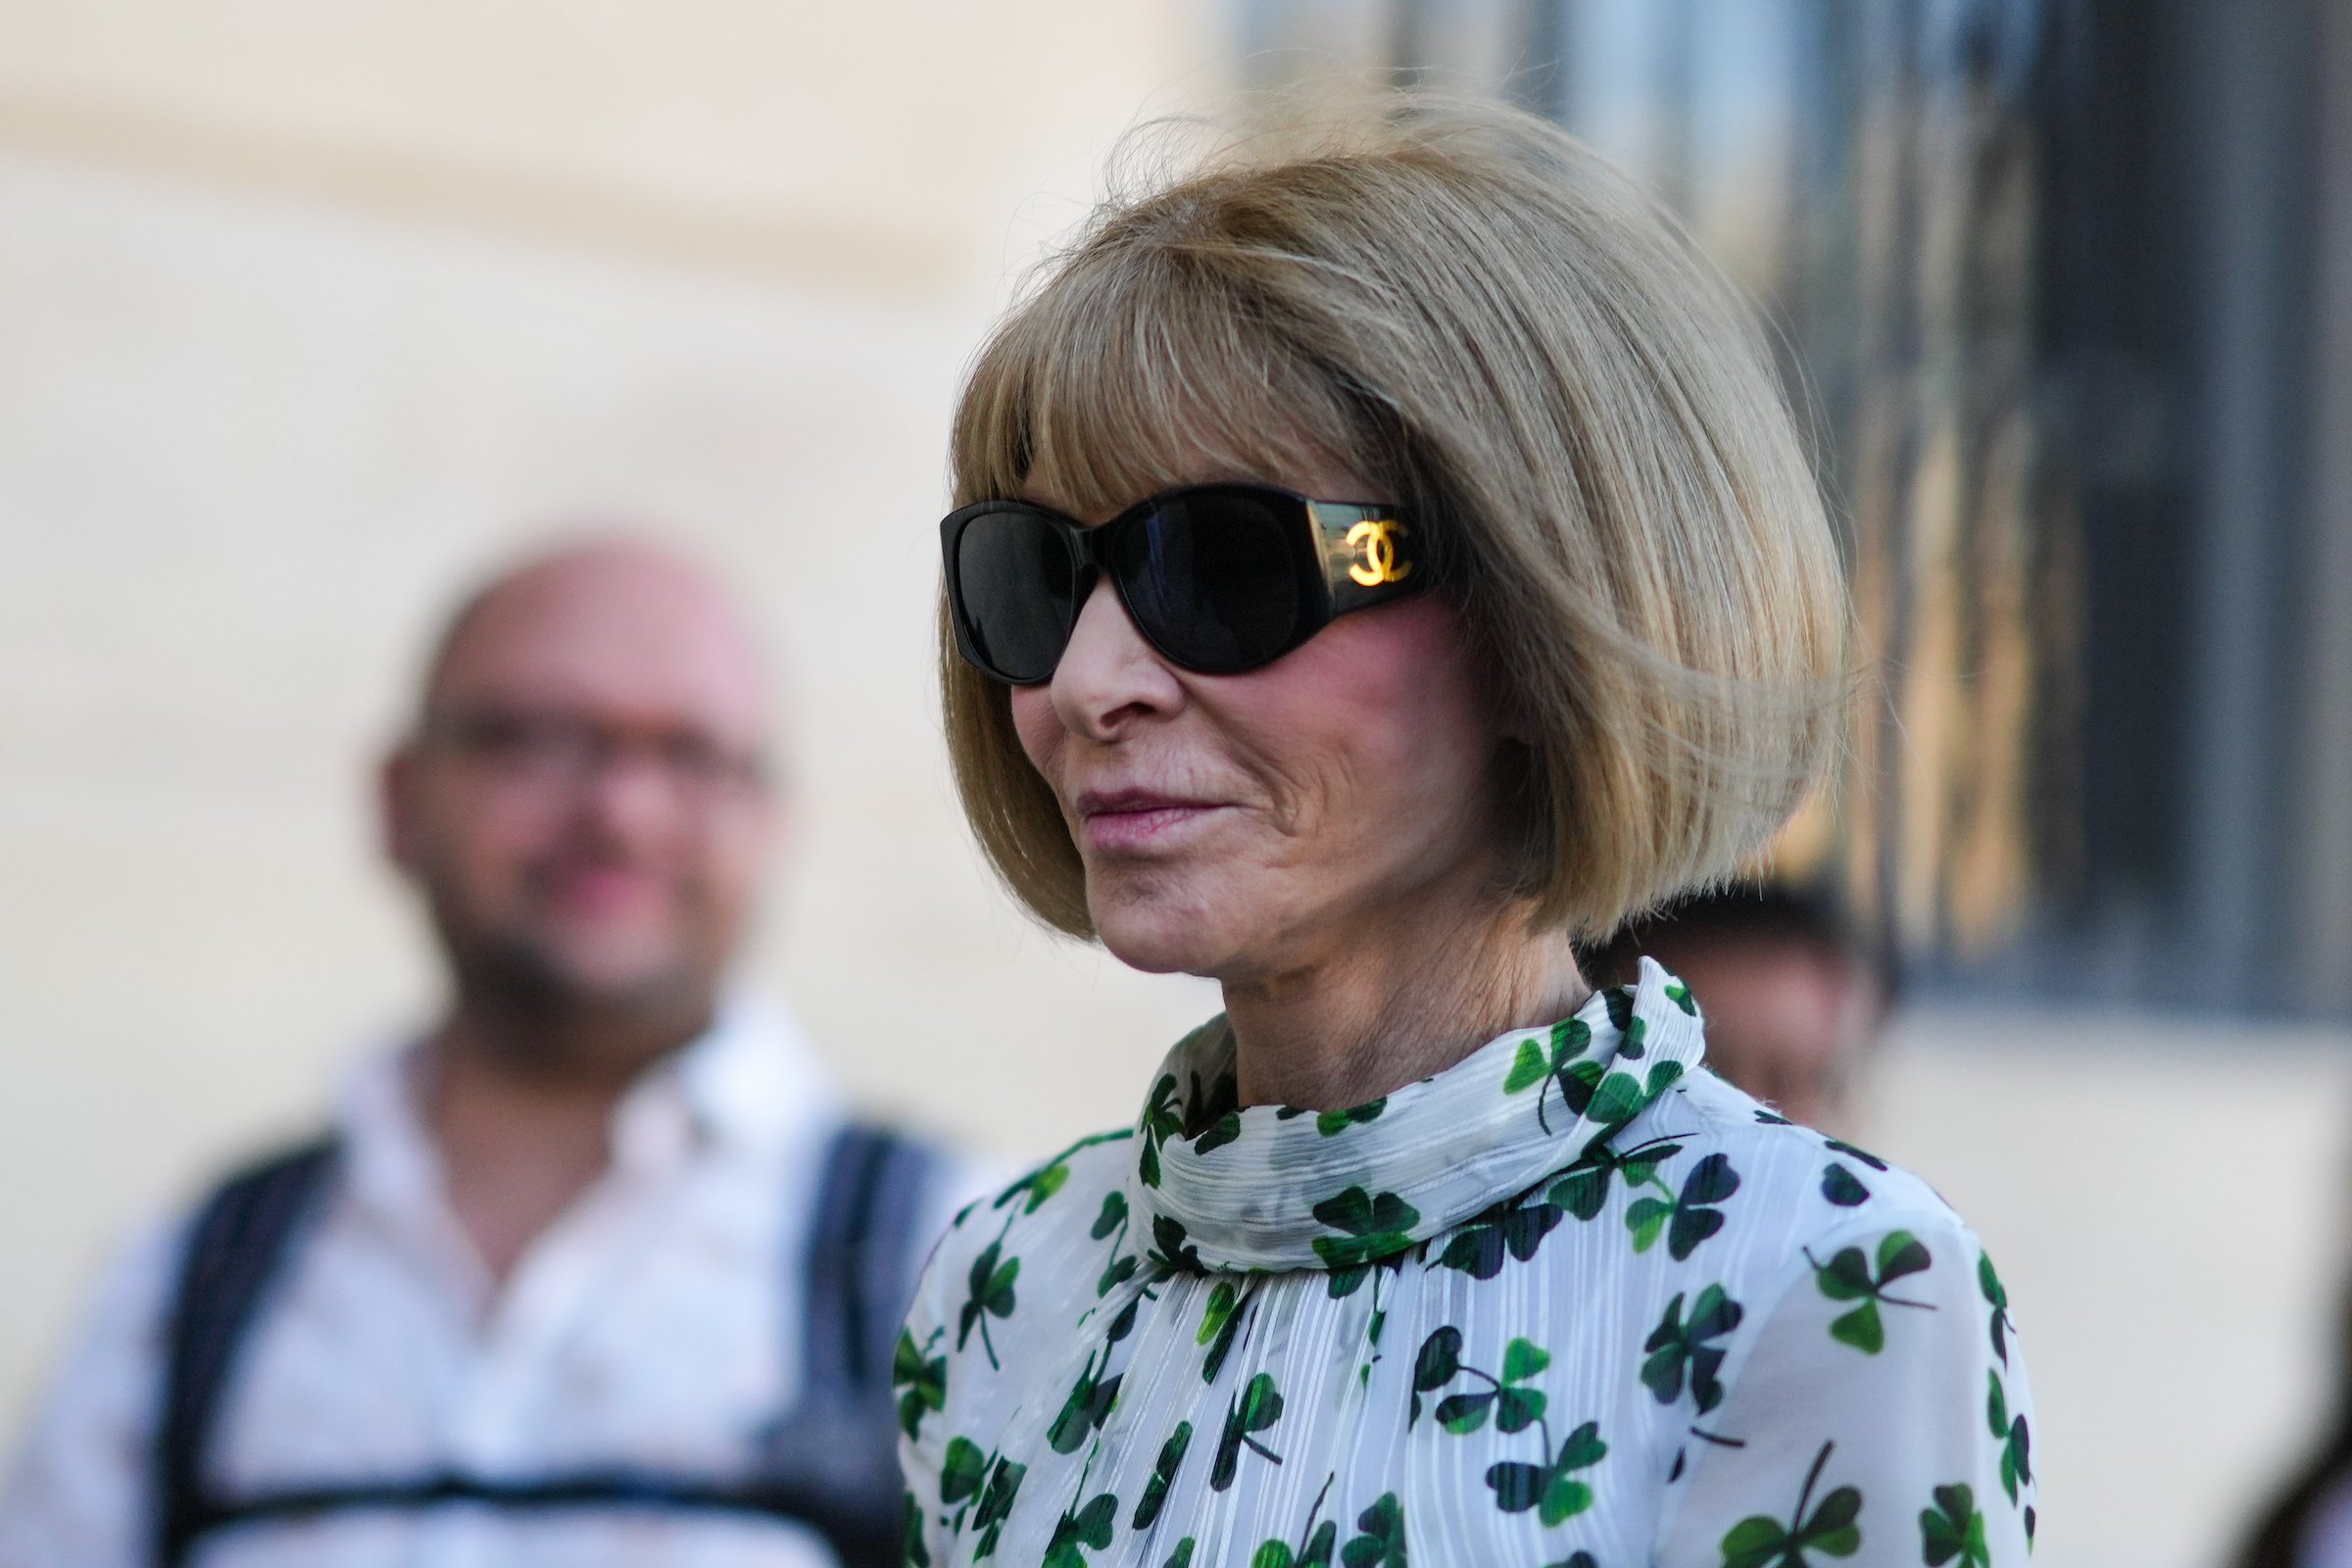 Anna Wintour, who reportedly set up Bradley Cooper and Huma Abedin